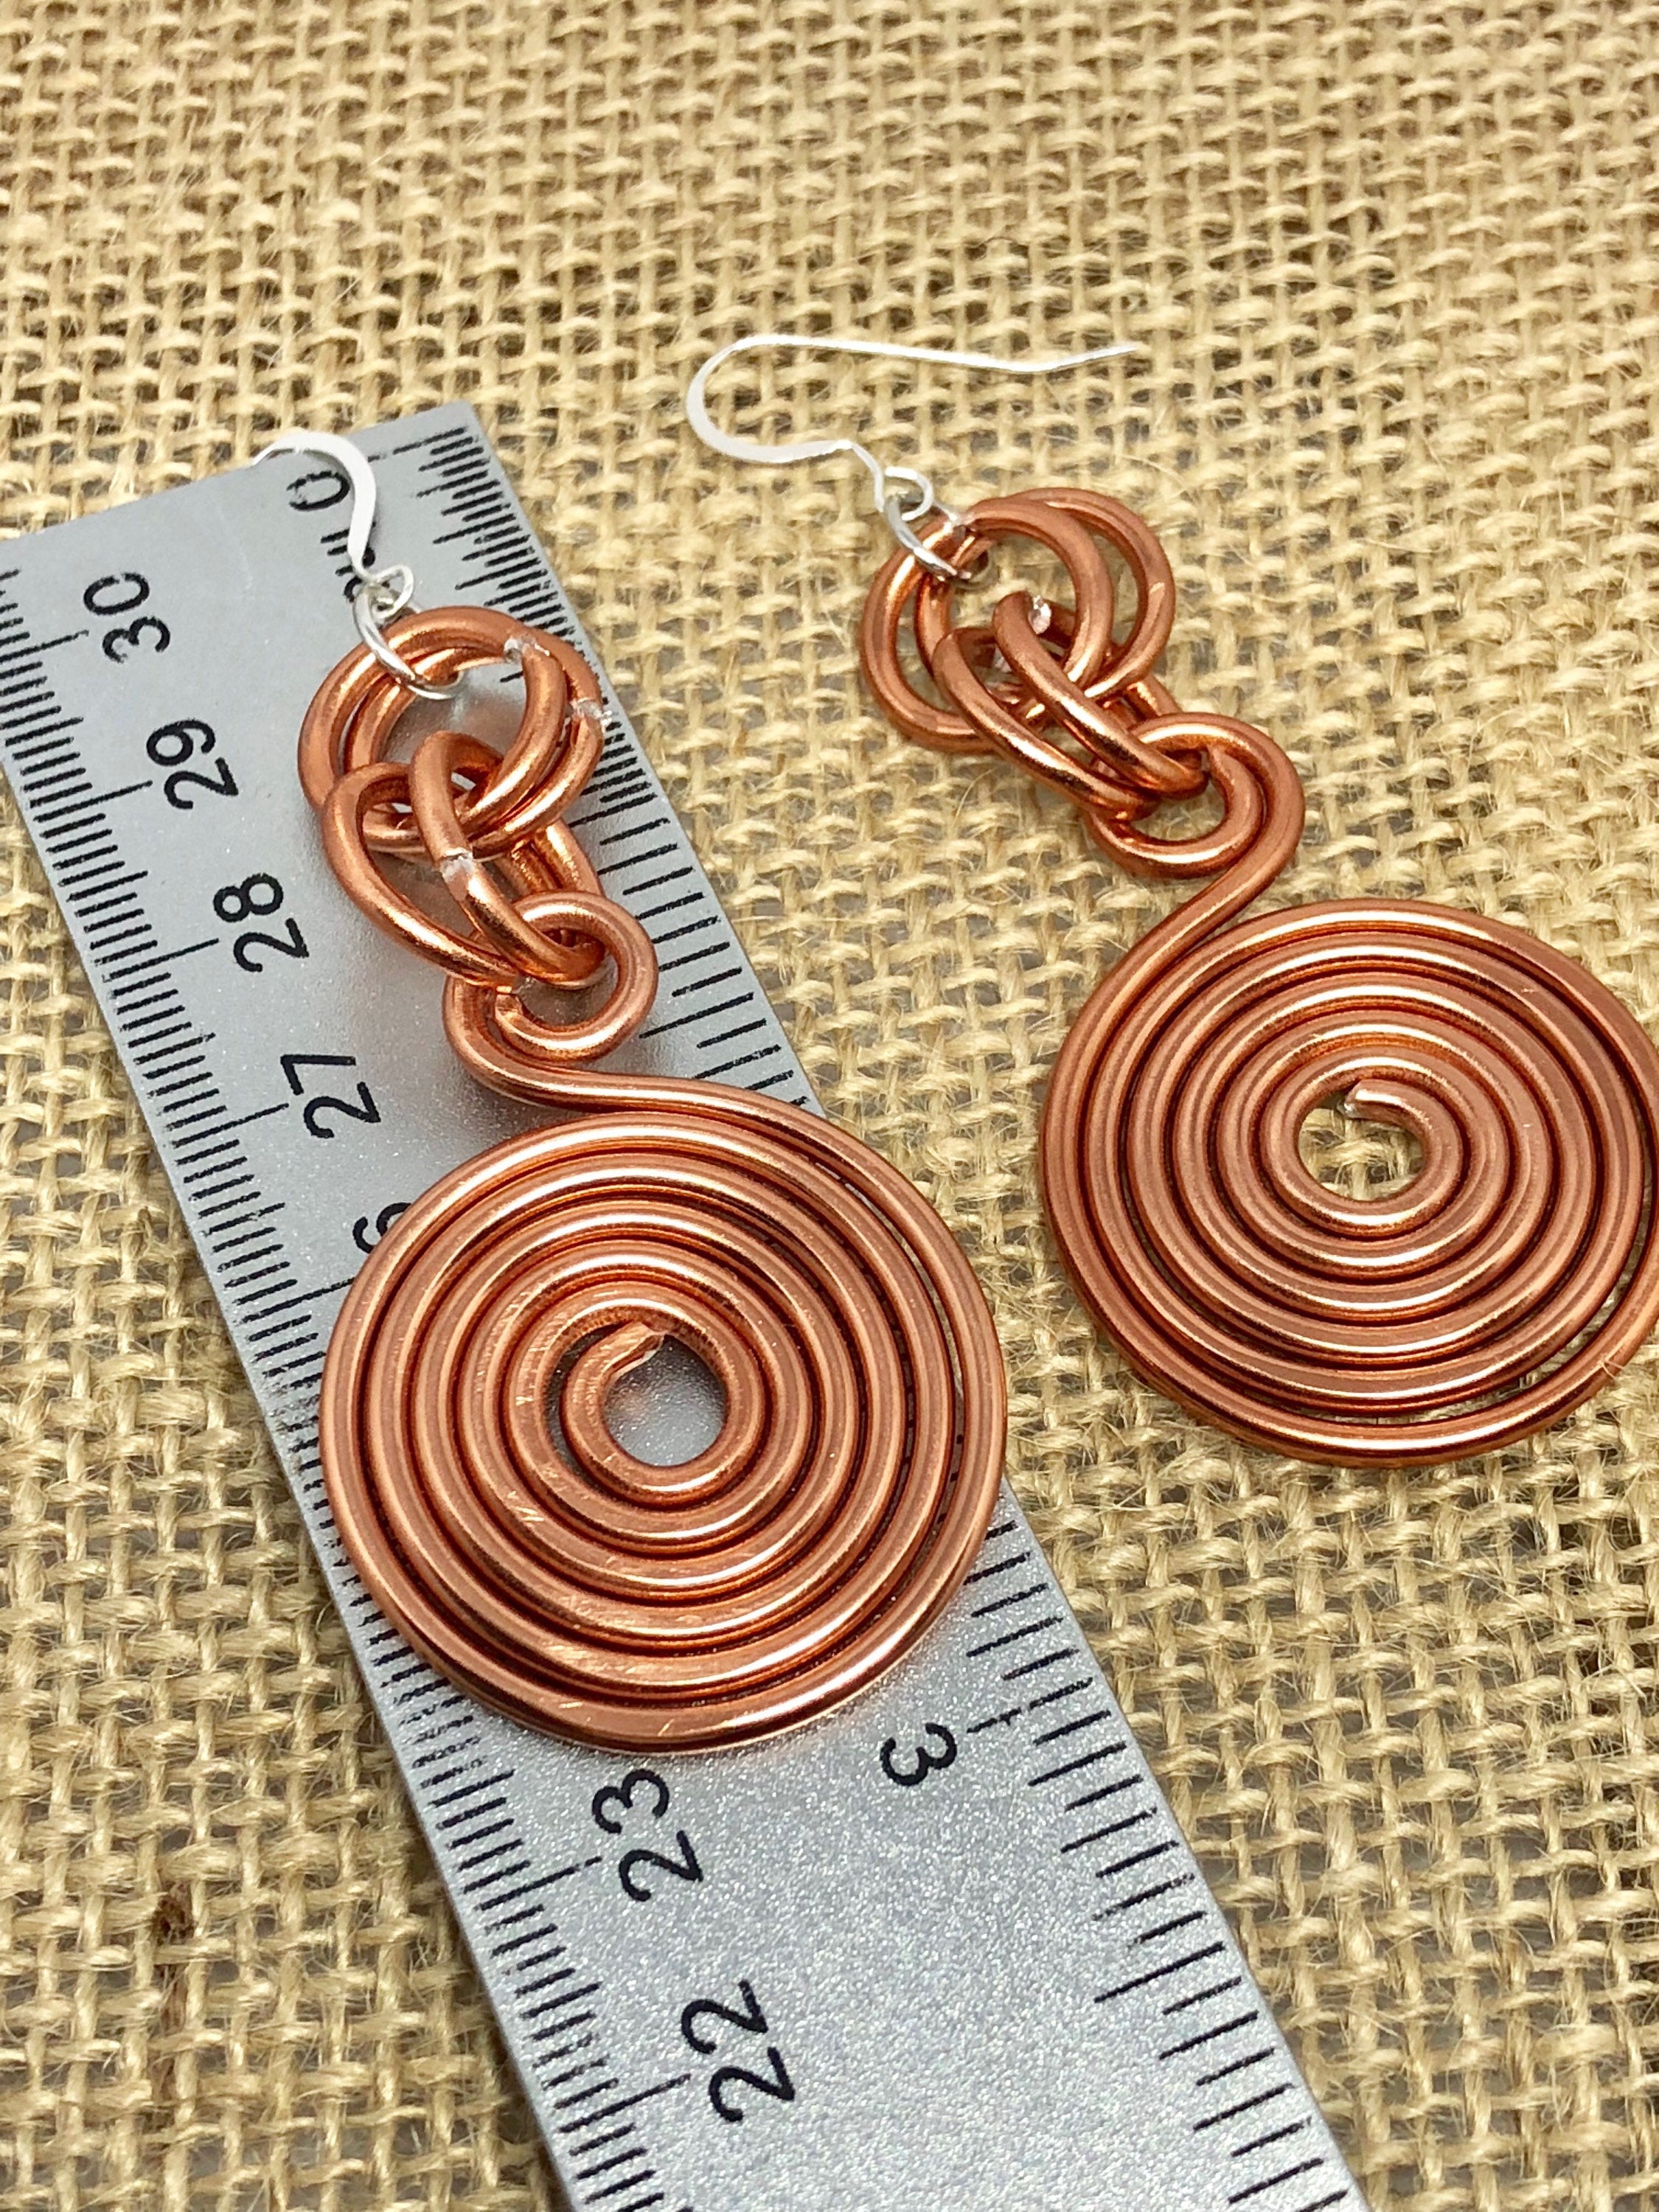 Round Copper colored Aluminum Wire Earrings, circle light weight handmade earrings